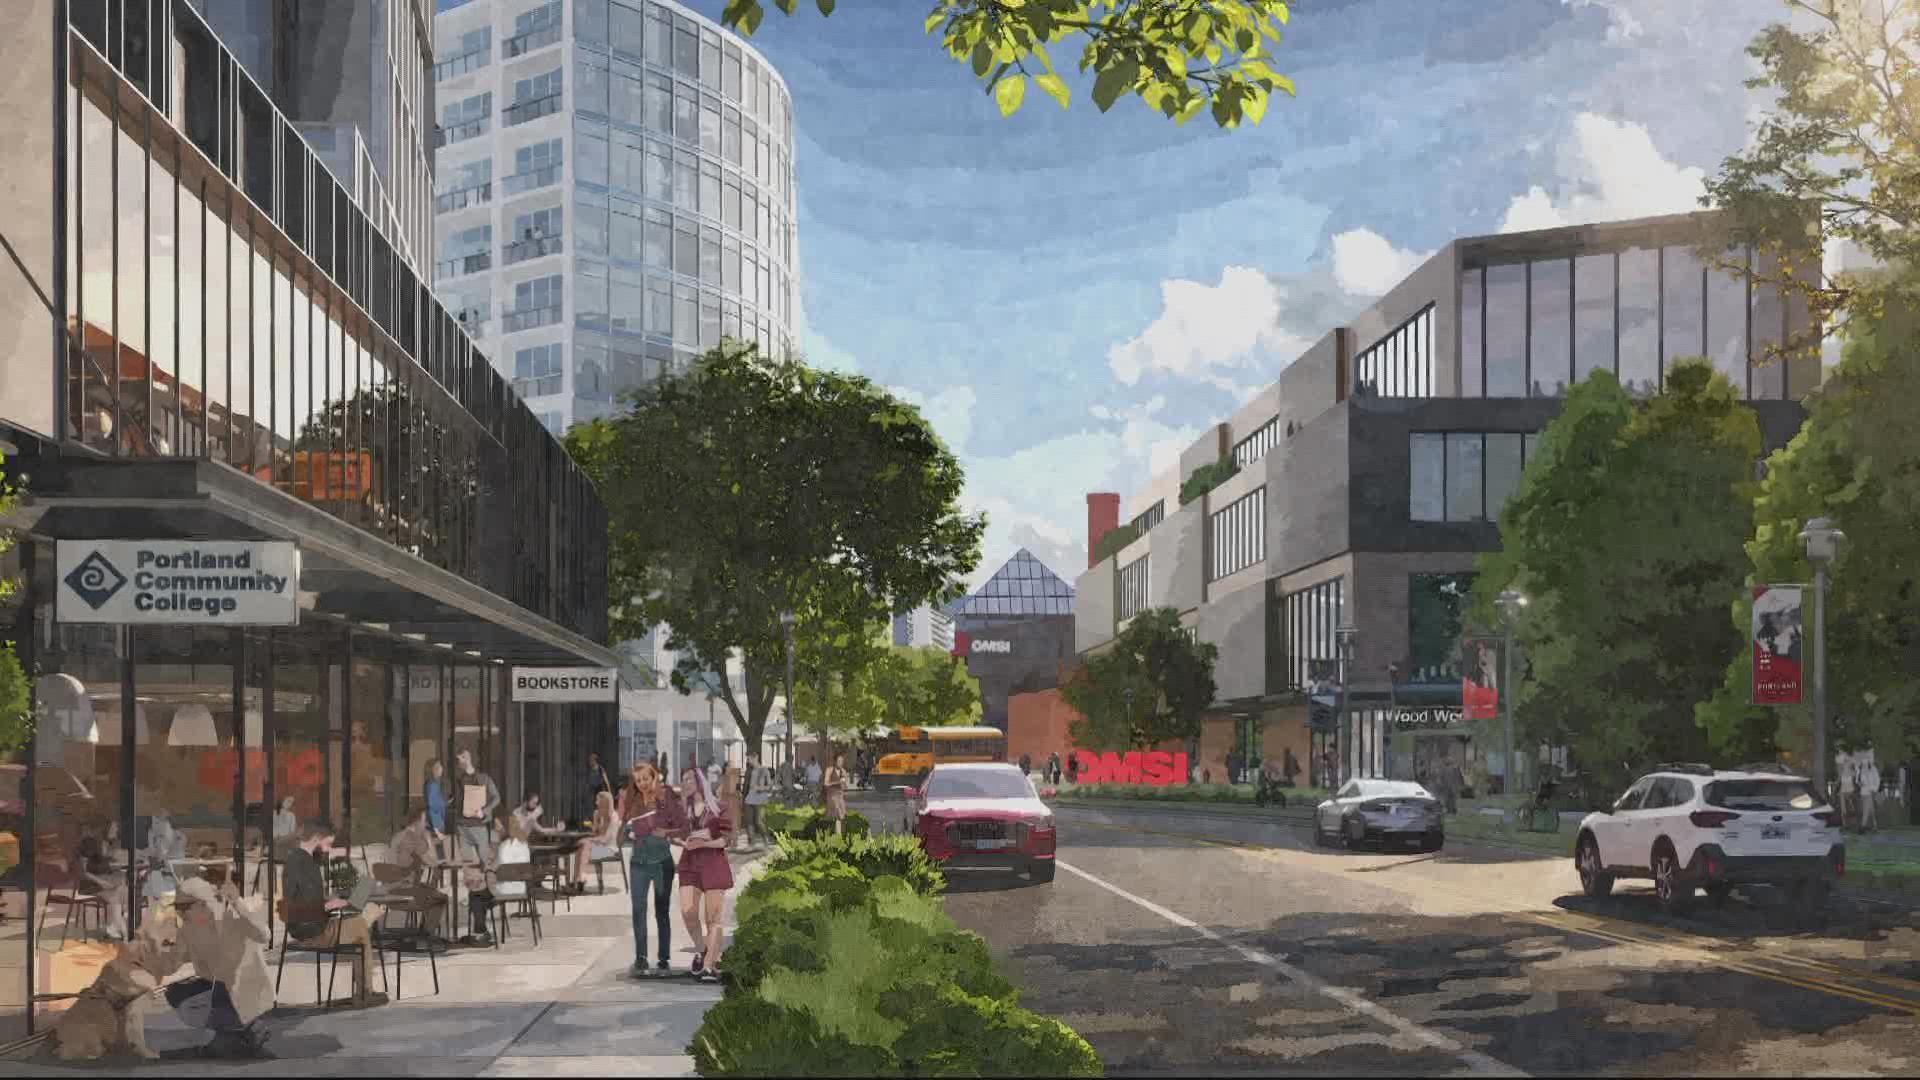 OMSI's proposal would transform about 10 city blocks with restaurants, businesses and housing. Construction could begin in the next three years.